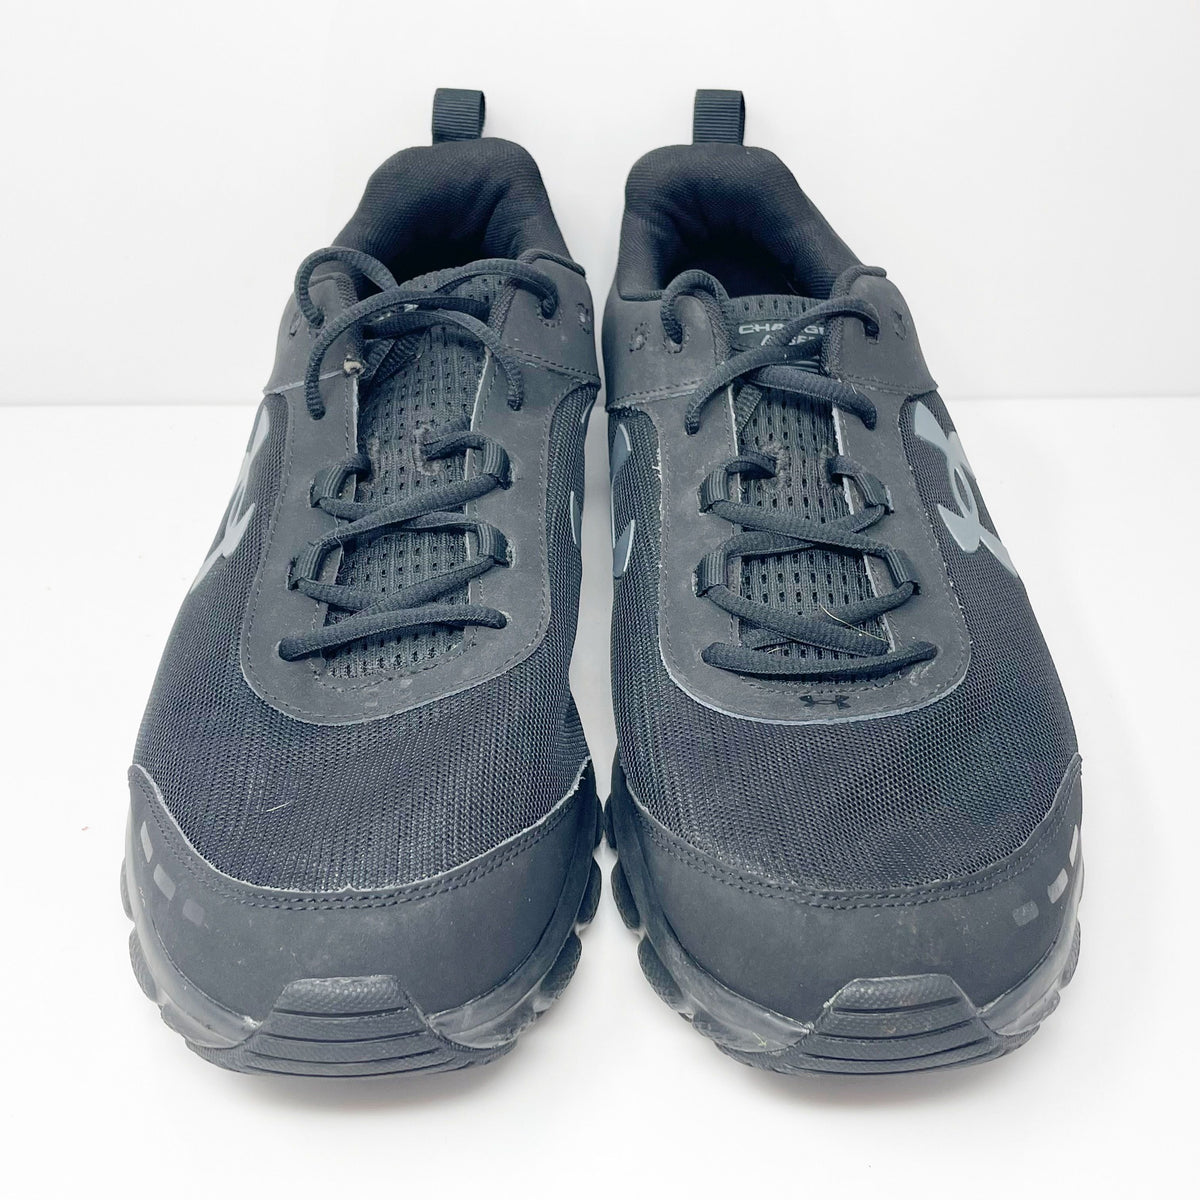 Under Armour Mens Charged Assert 8 3021952-002 Black Running Shoes Sne ...